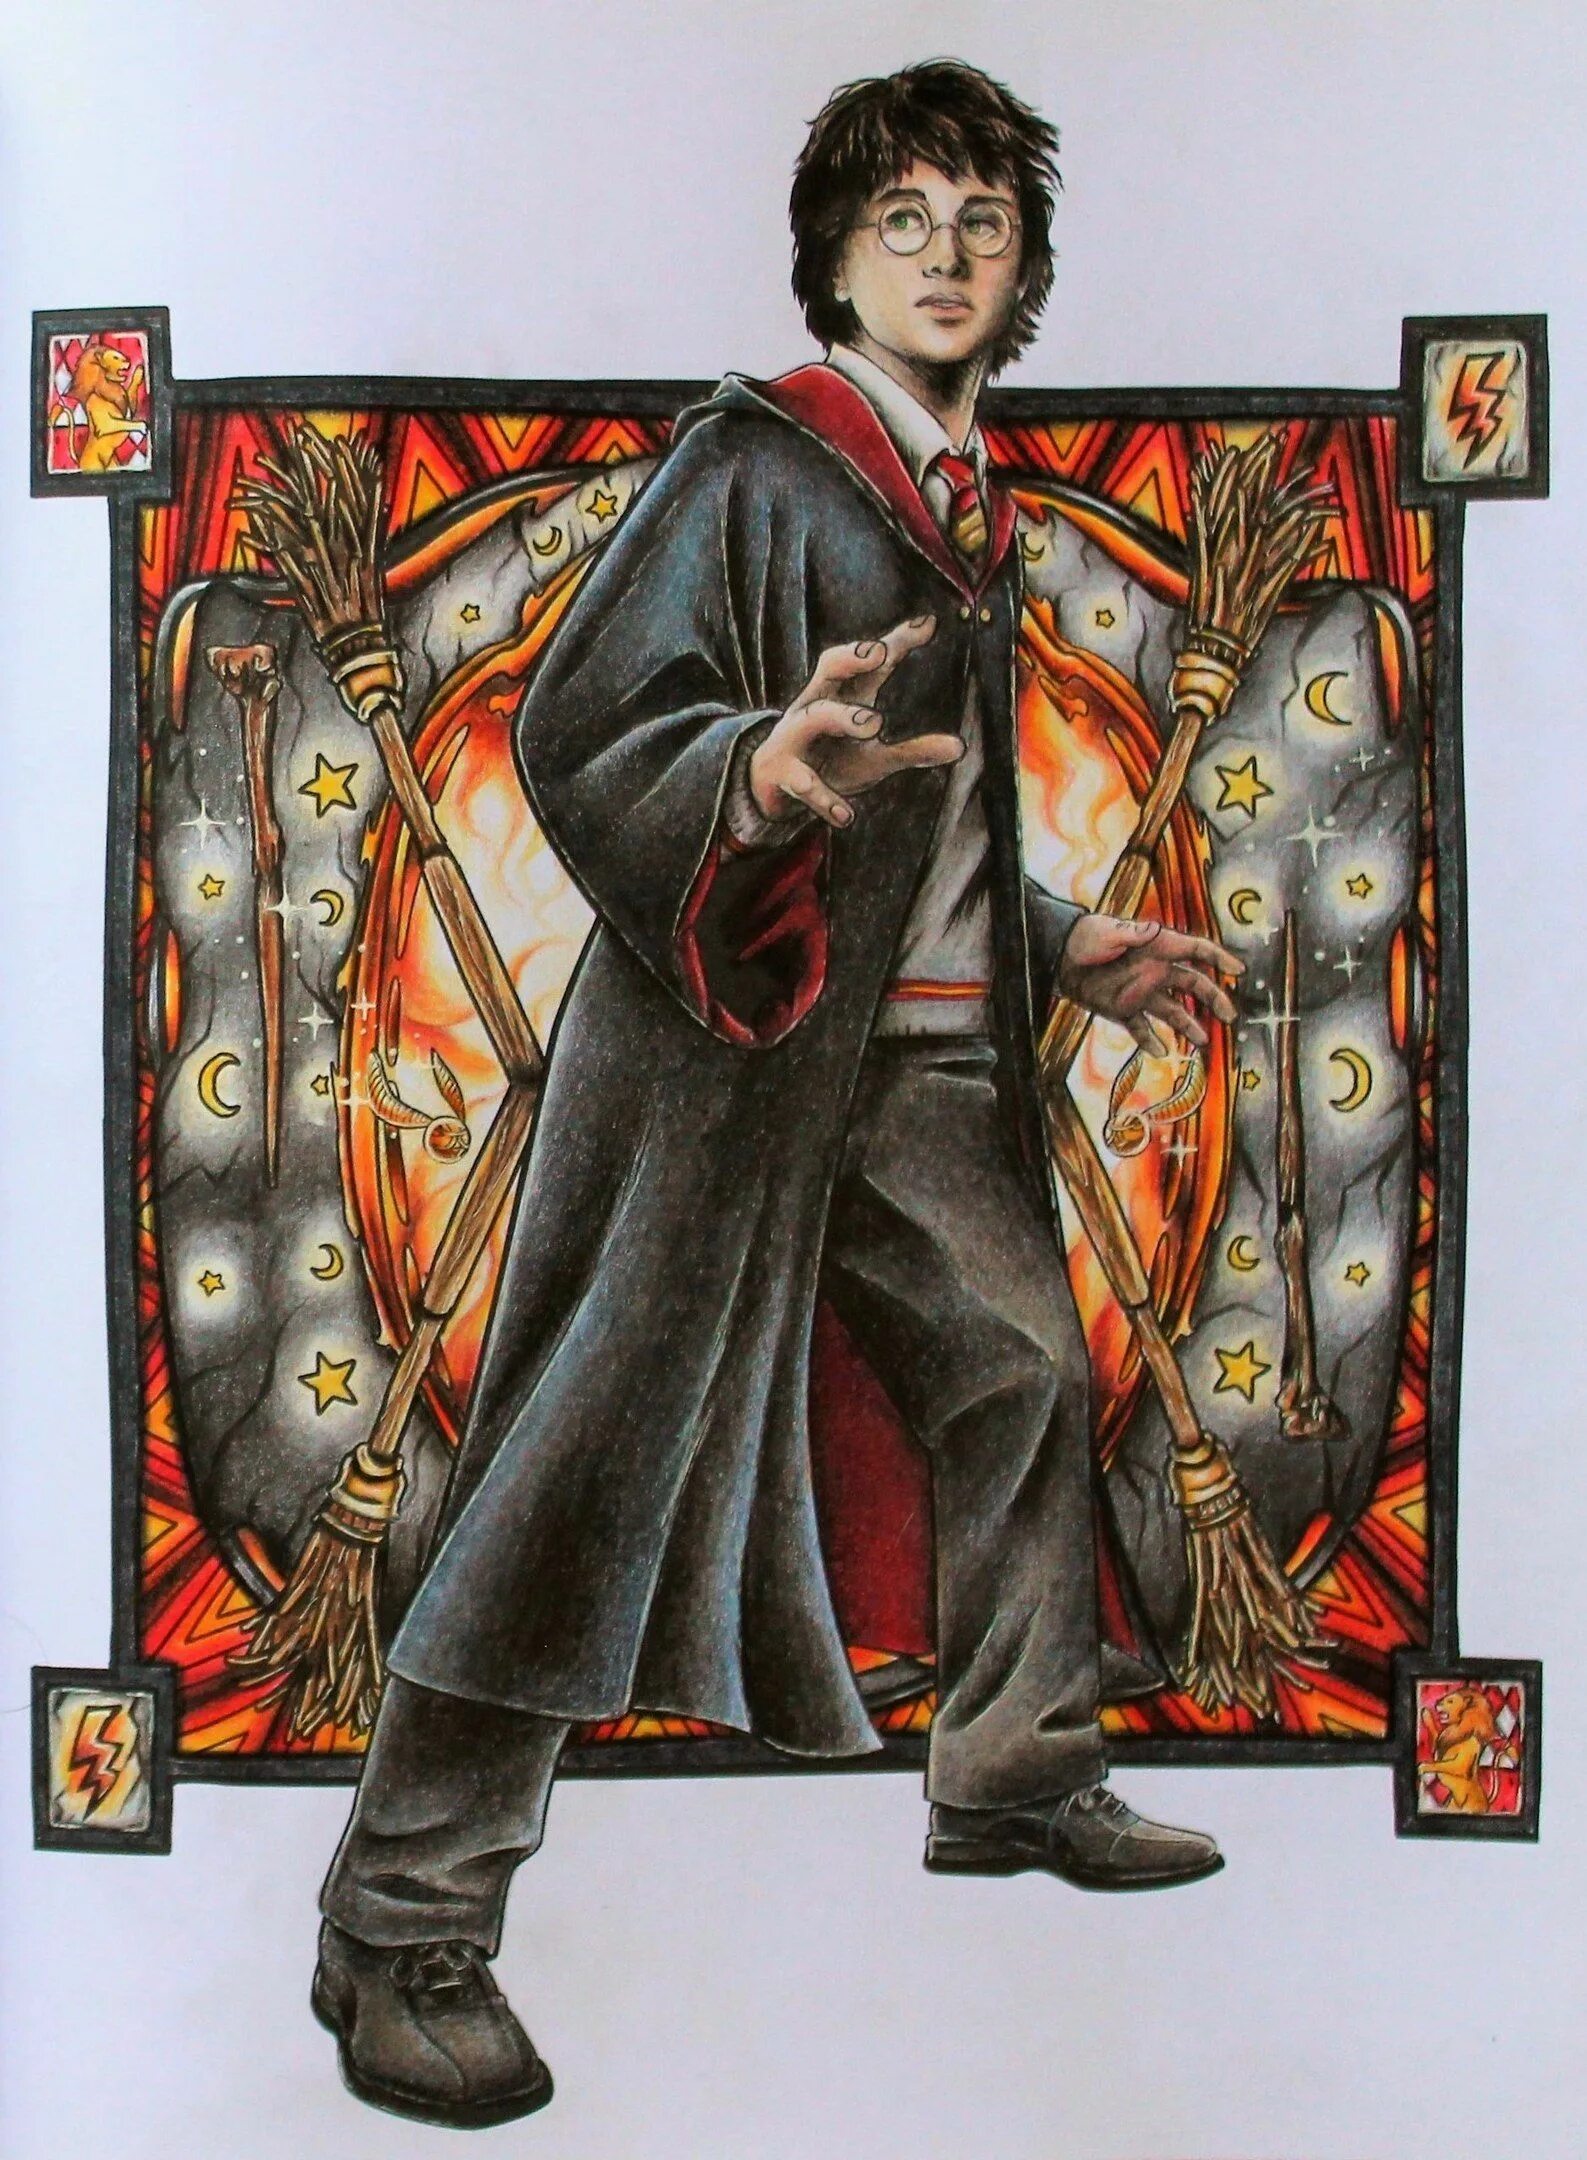 Harry potter wizards and where to find them #5